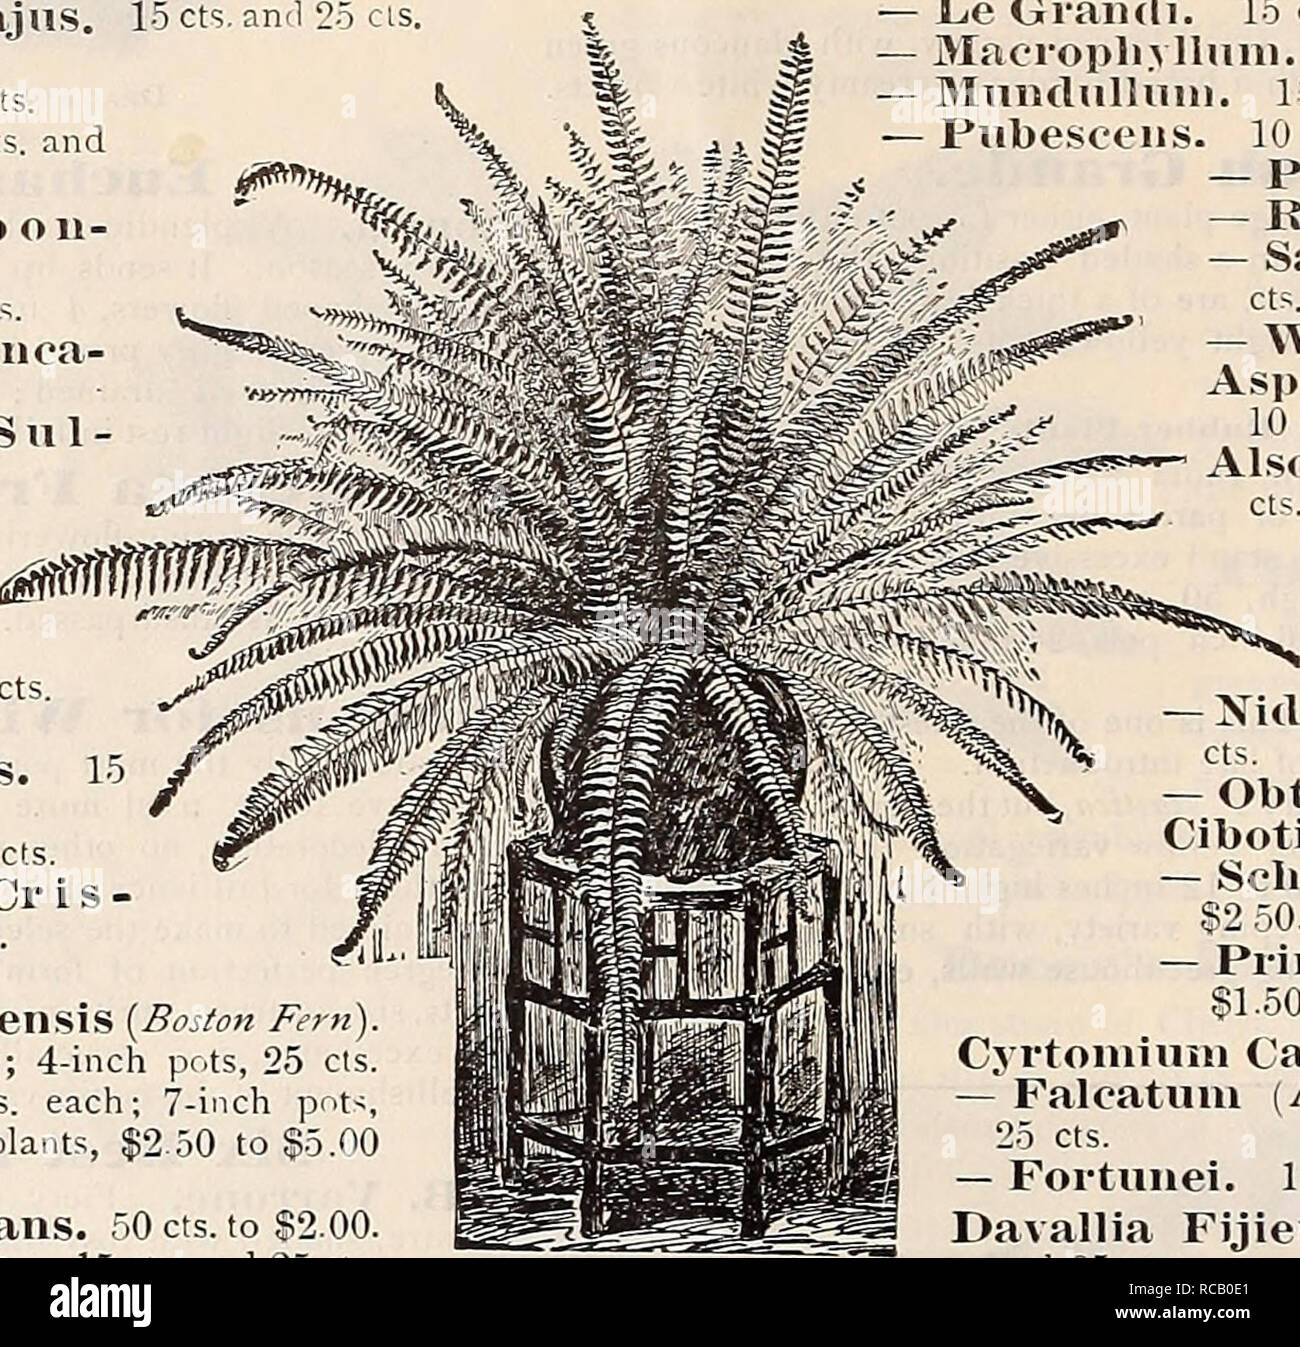 . Dreer's autumn 1901 catalogue. Bulbs (Plants) Catalogs; Flowers Seeds Catalogs; Gardening Equipment and supplies Catalogs; Nurseries (Horticulture) Catalogs; Fruit Seeds Catalogs. Davallia Stricta. Davallia Fijiensis 3Iajus. 15 cts. an — Ornata. 75 cts. — Pentaphylla. 15 cts. — Stricta. 10 cts., 15 cts. and 25 cts. Dietyogramma J a p o n- ica. 25 cts. Variesata. 25 cts. Didymoeblaena Trimca- tula. 15 cts. Gymnog r a m ma S n 1 - pburea. 15 cts. La st re a Aristata Variegata. 10 cts. — Clirysoloba. 10 cts. — Opaea. 10 cts. Lomaria Ciliata. 10 cts. — Gibba. 10 cts. Lygodium Scanclens. 15 cts.  Stock Photo